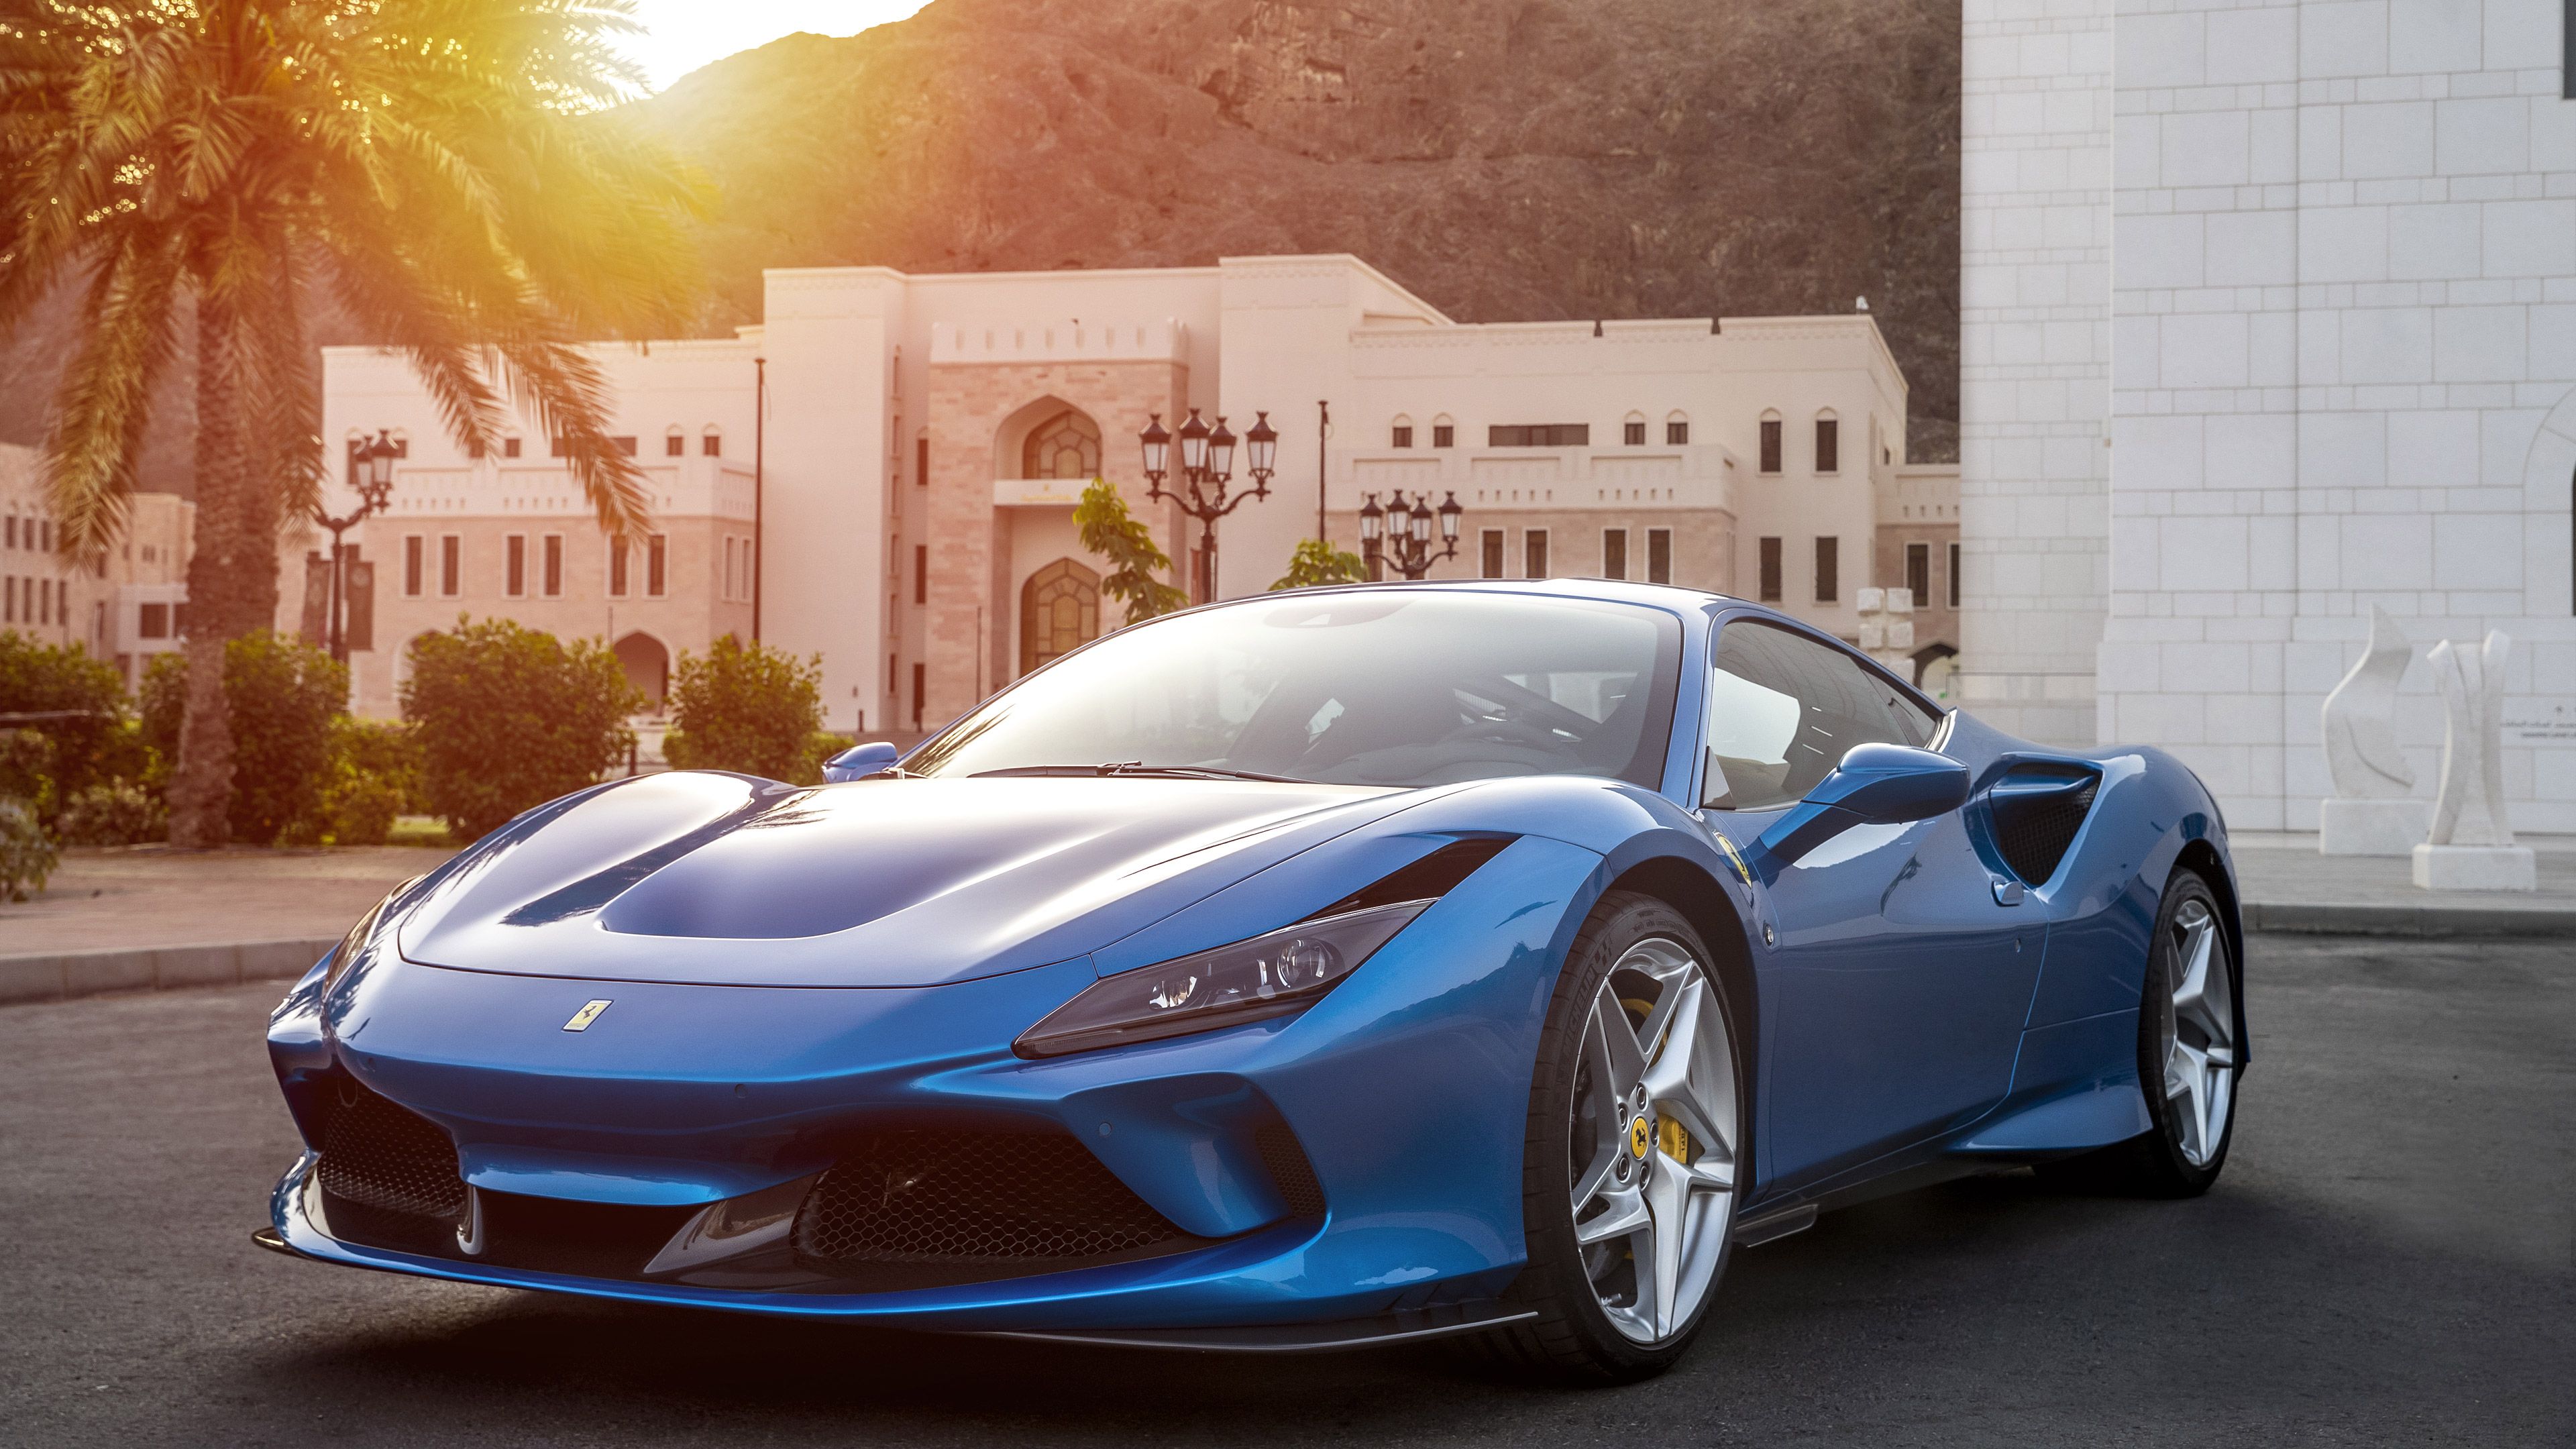 Here's What Makes The Ferrari F8 Tributo So Special